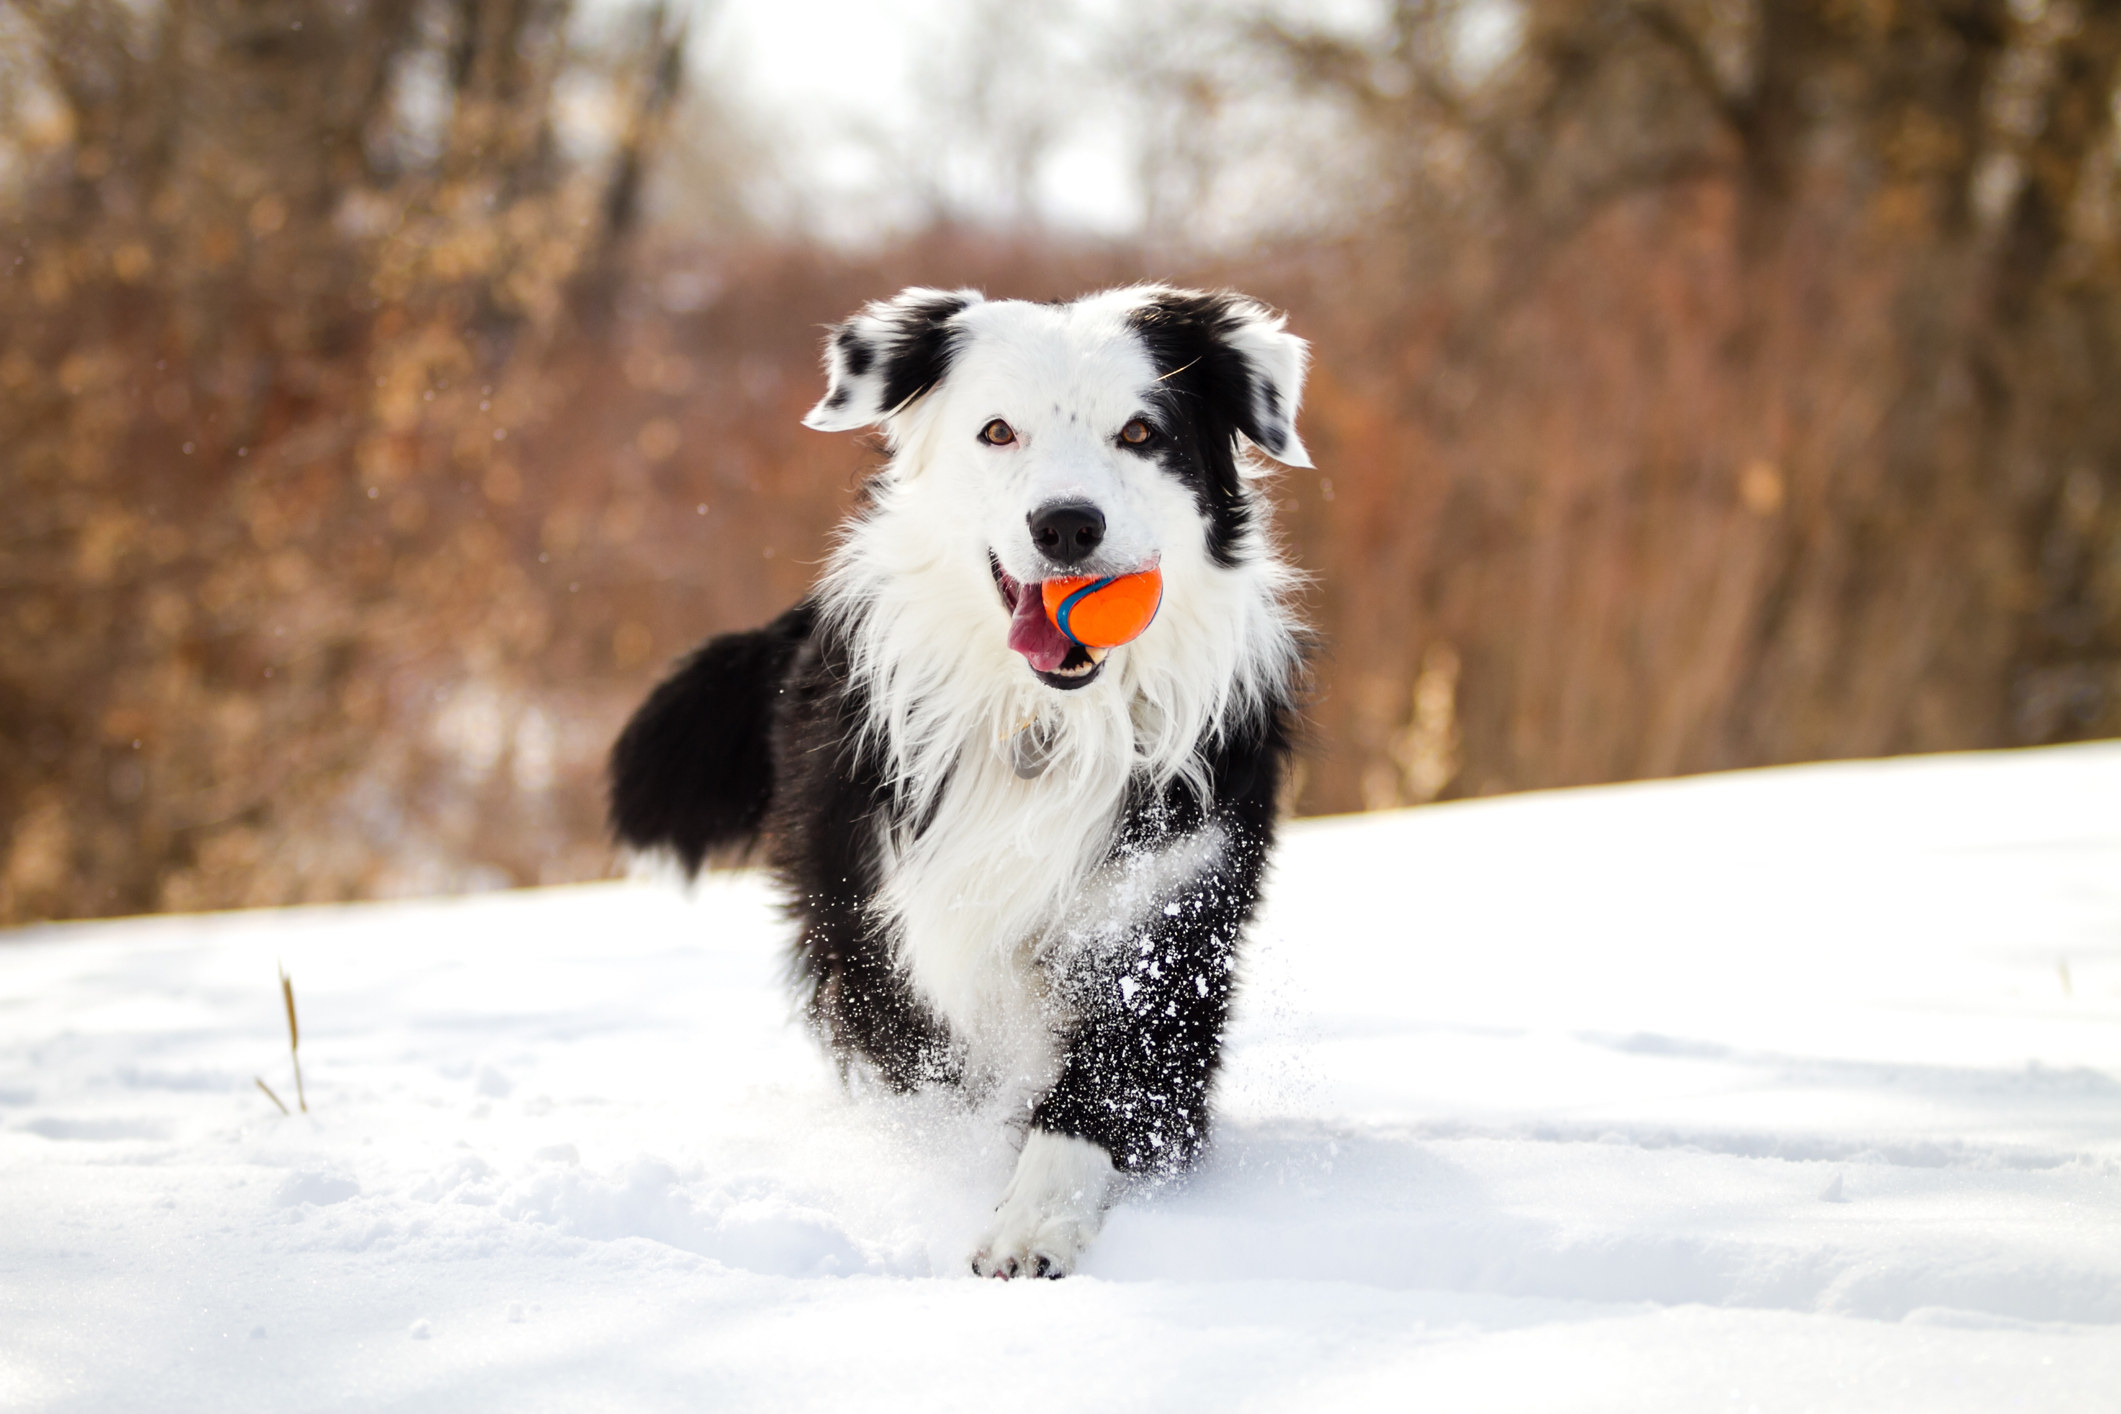 Border collie running toward camera while holding a red ball.